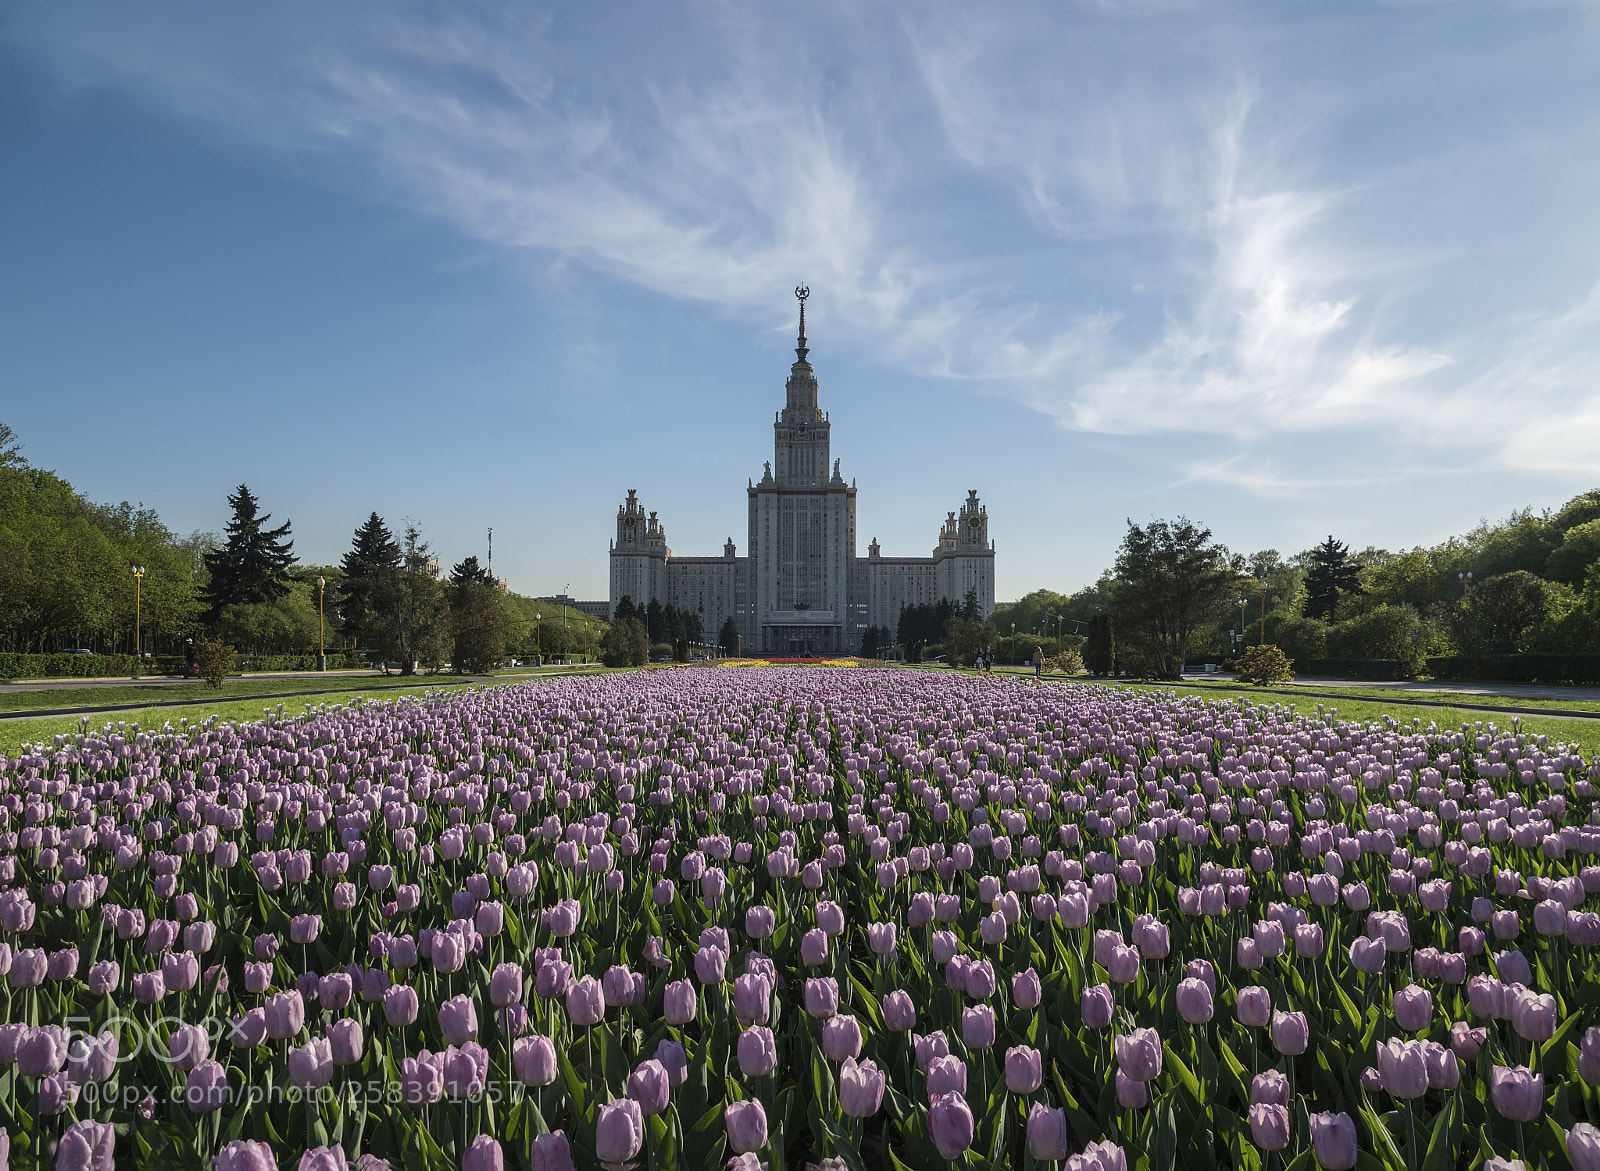 Sony a6300 sample photo. Tulips at moscow state photography